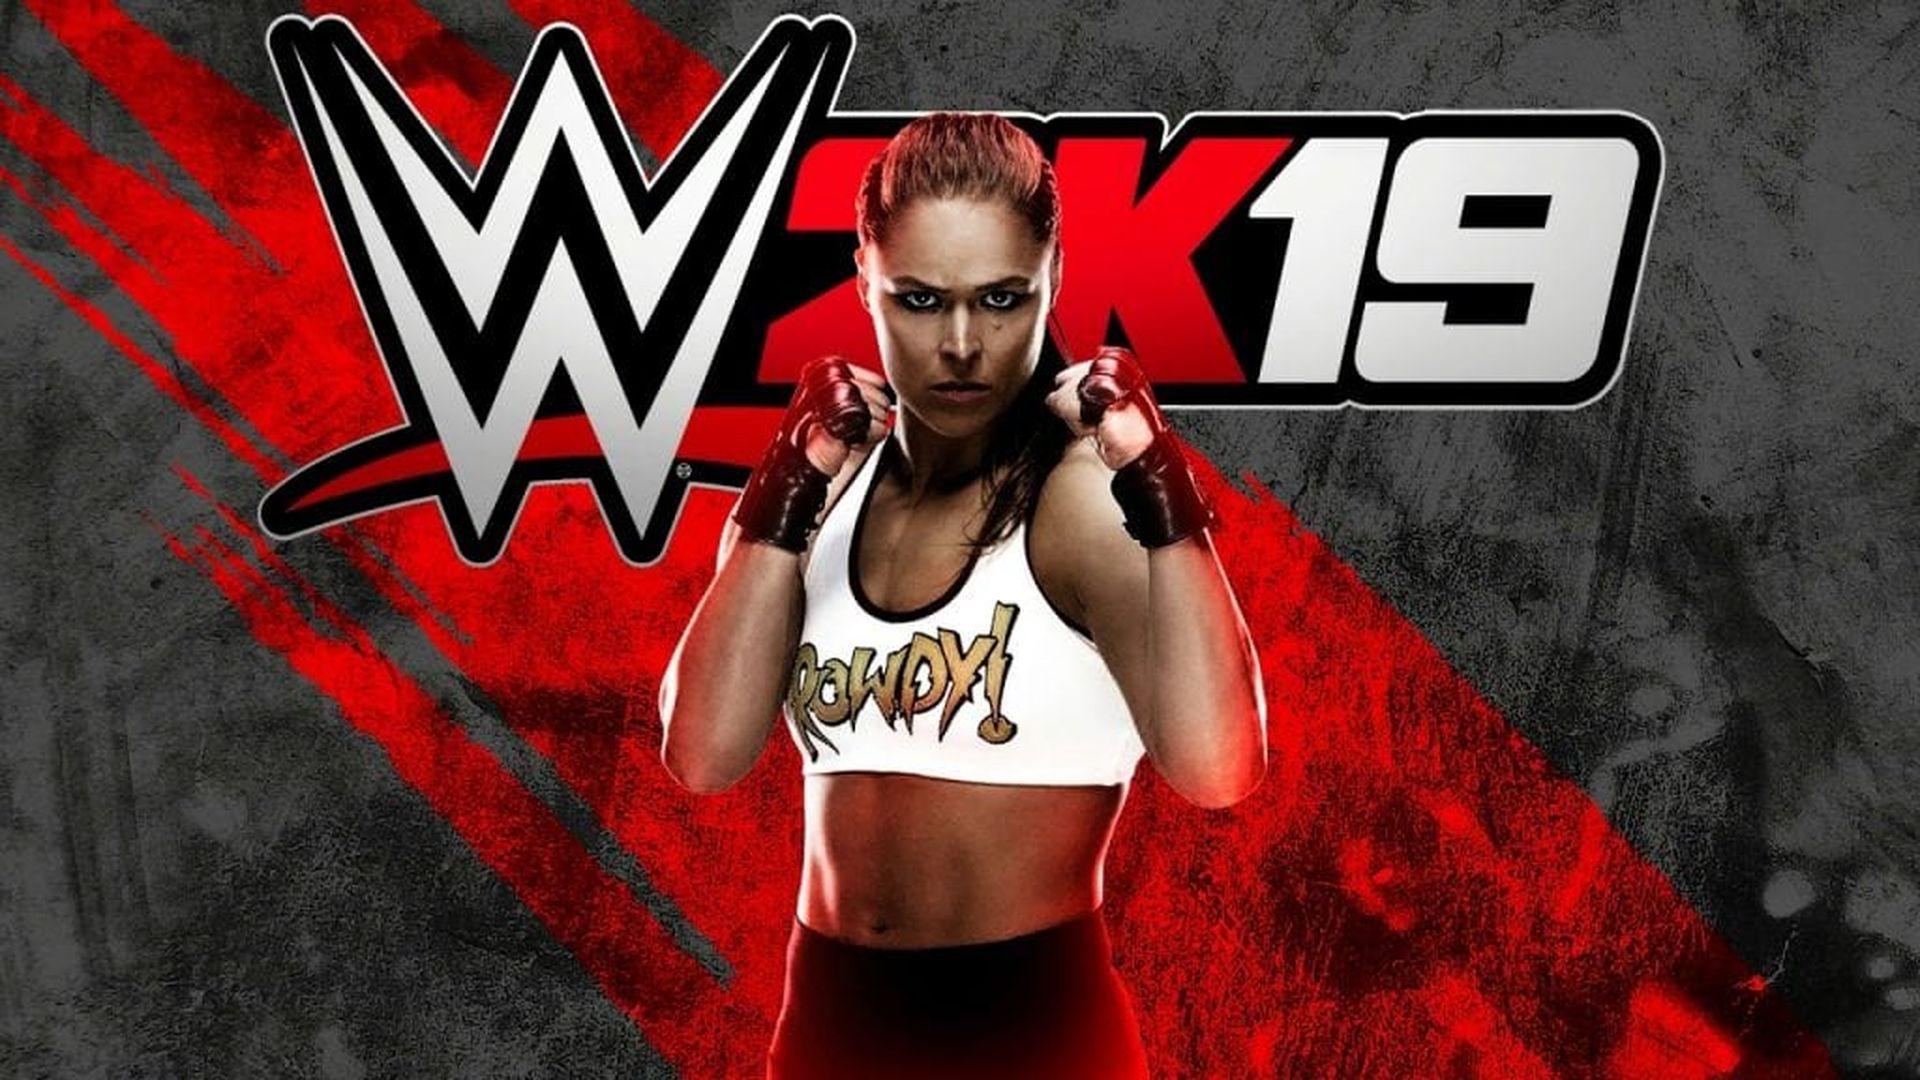 2K confirms WWE 2K19 won't be coming to the Switch